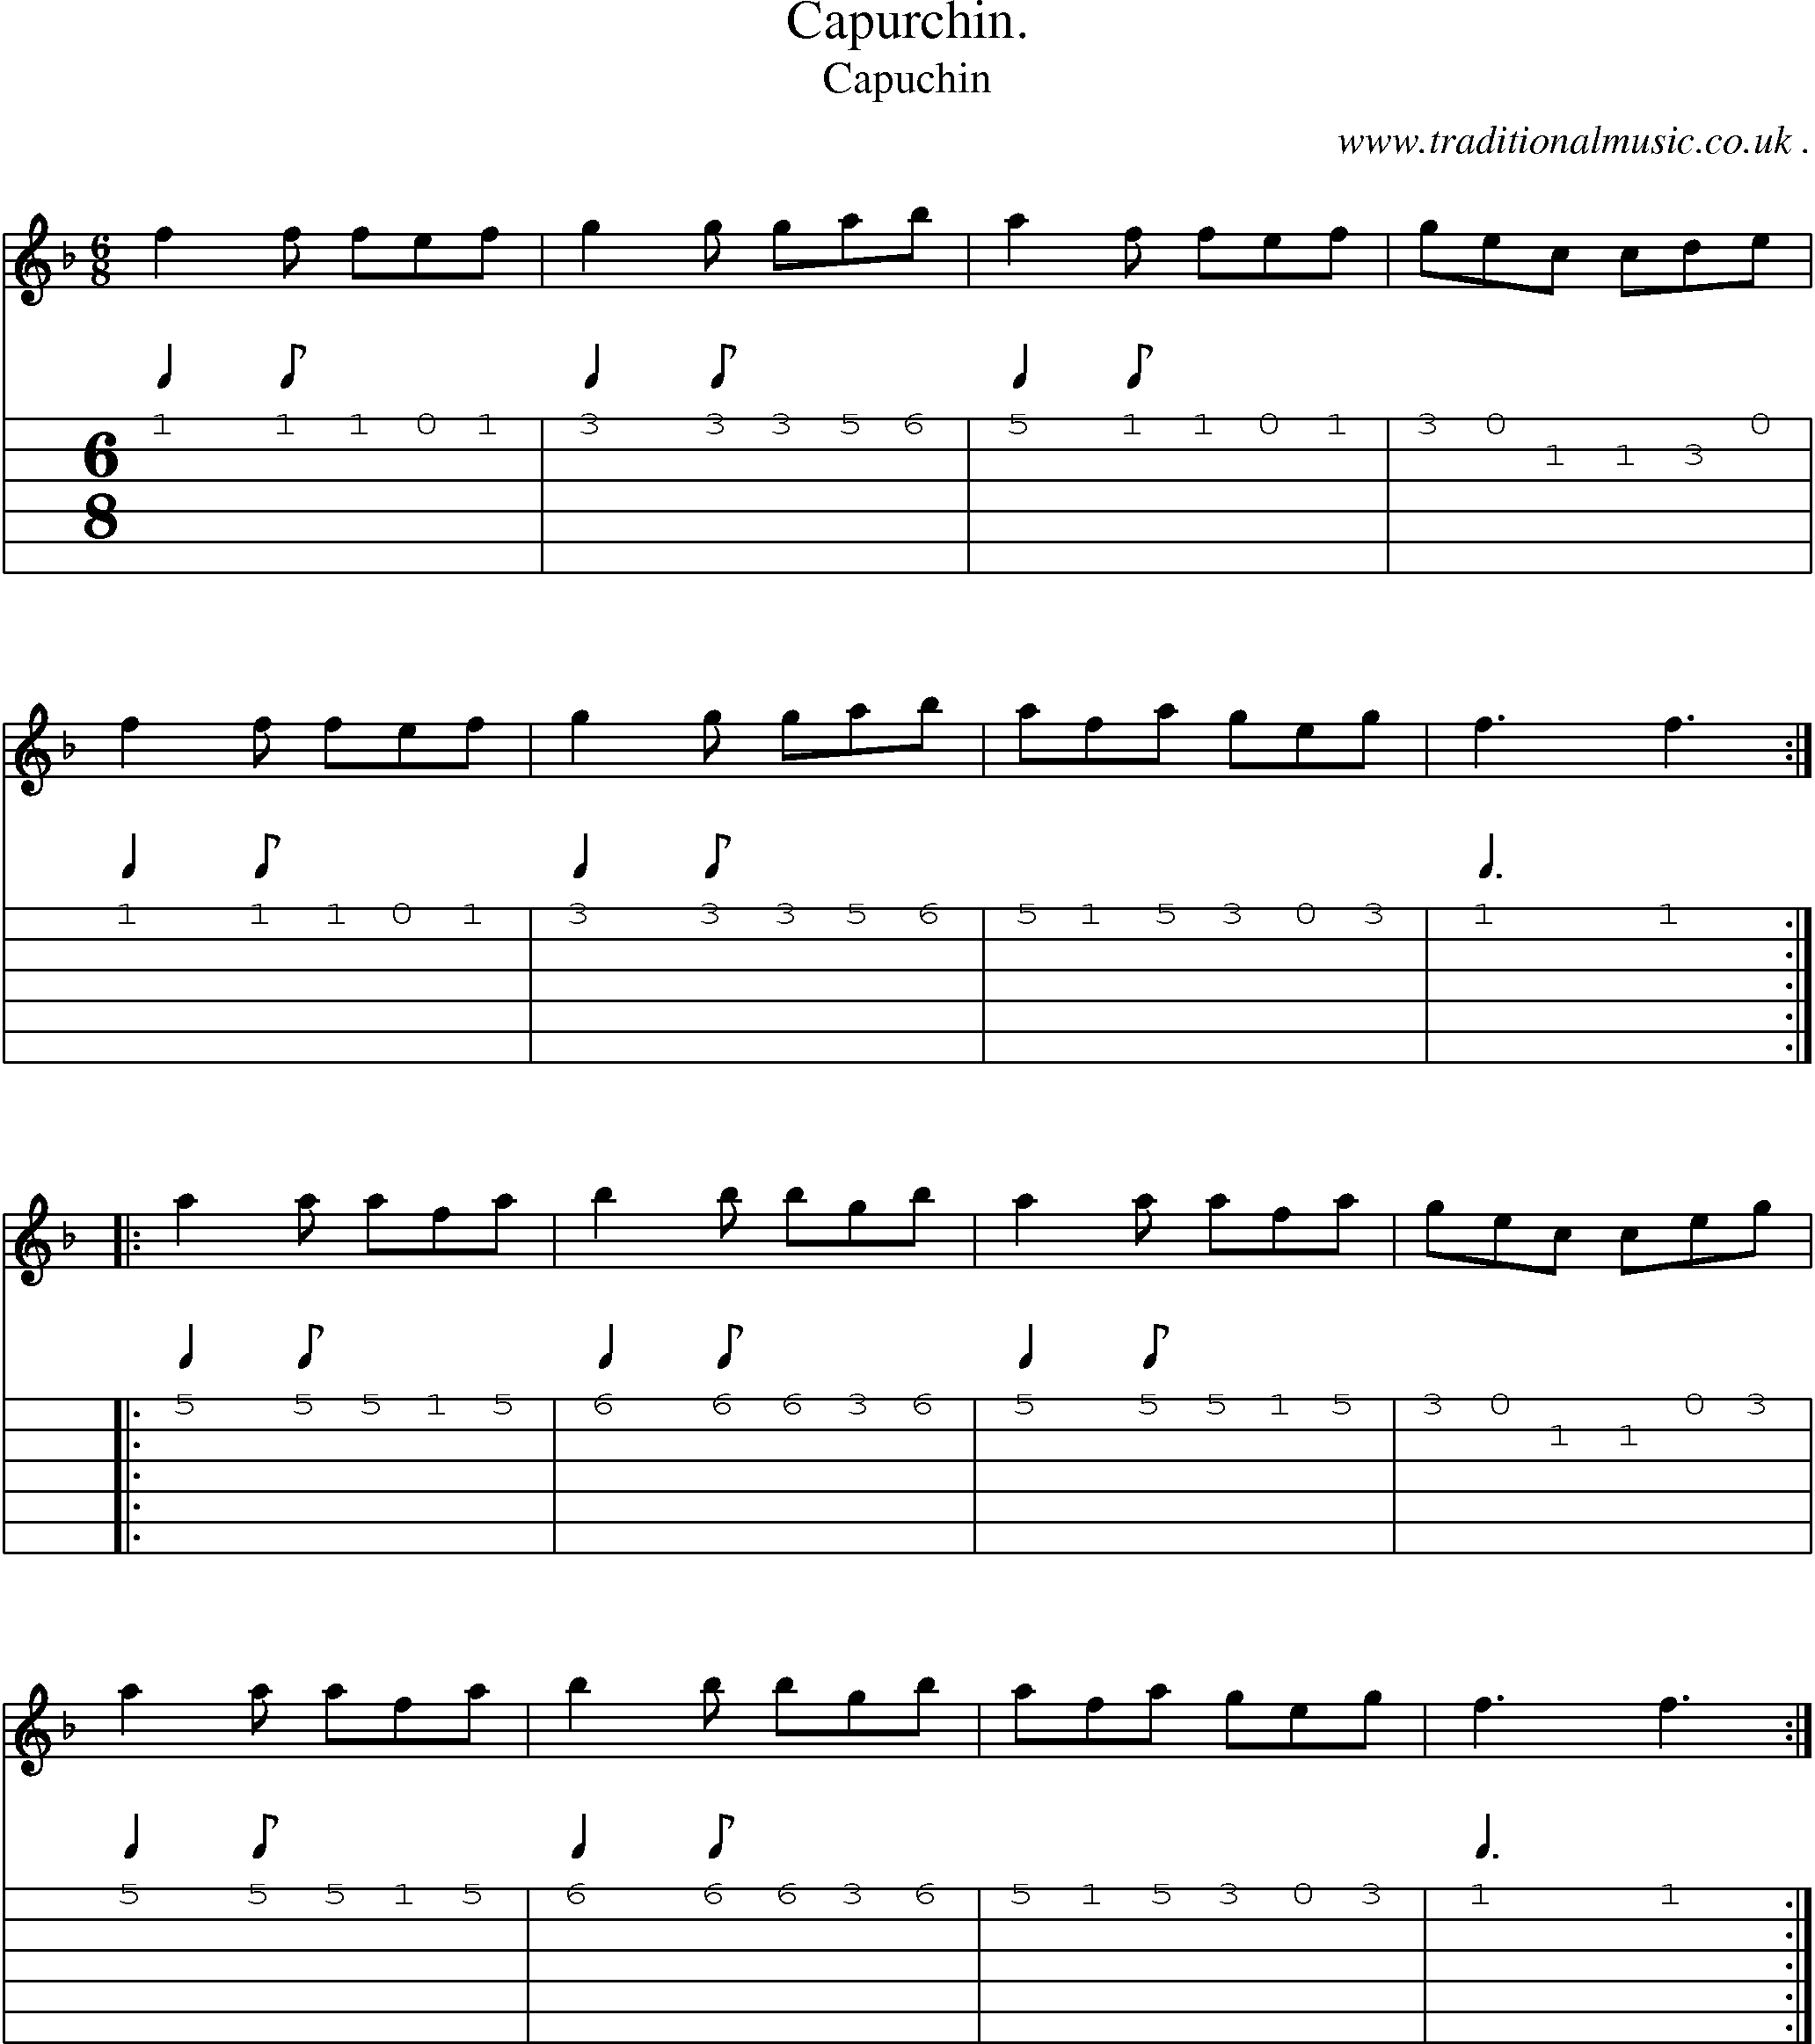 Sheet-Music and Guitar Tabs for Capurchin